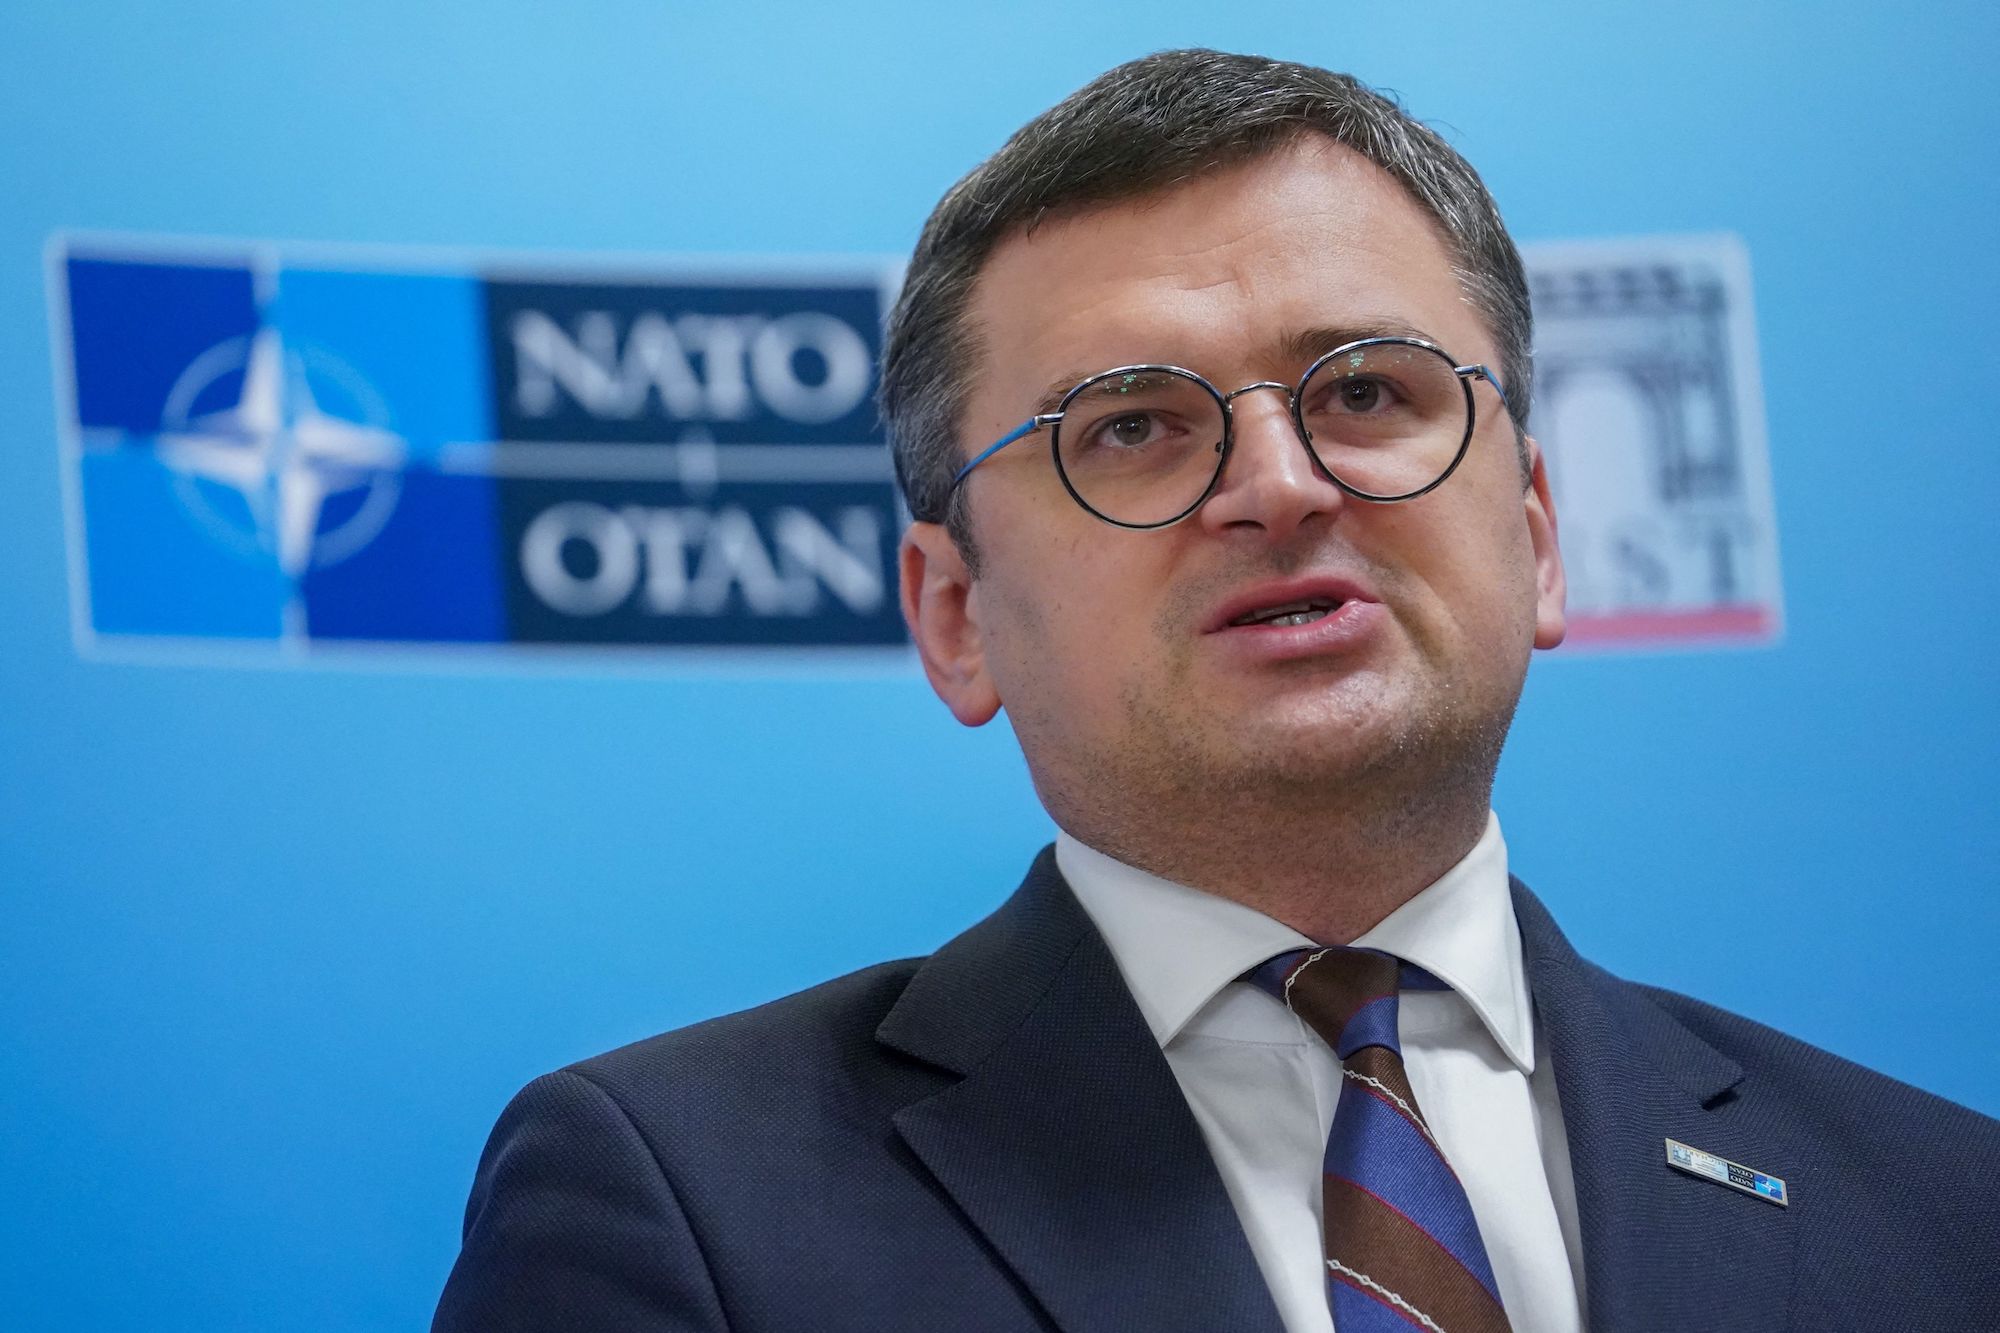 Ukraine's Foreign minister Dmytro Kuleba addresses the press during a NATO meeting in Bucharest on November 29, 2022.